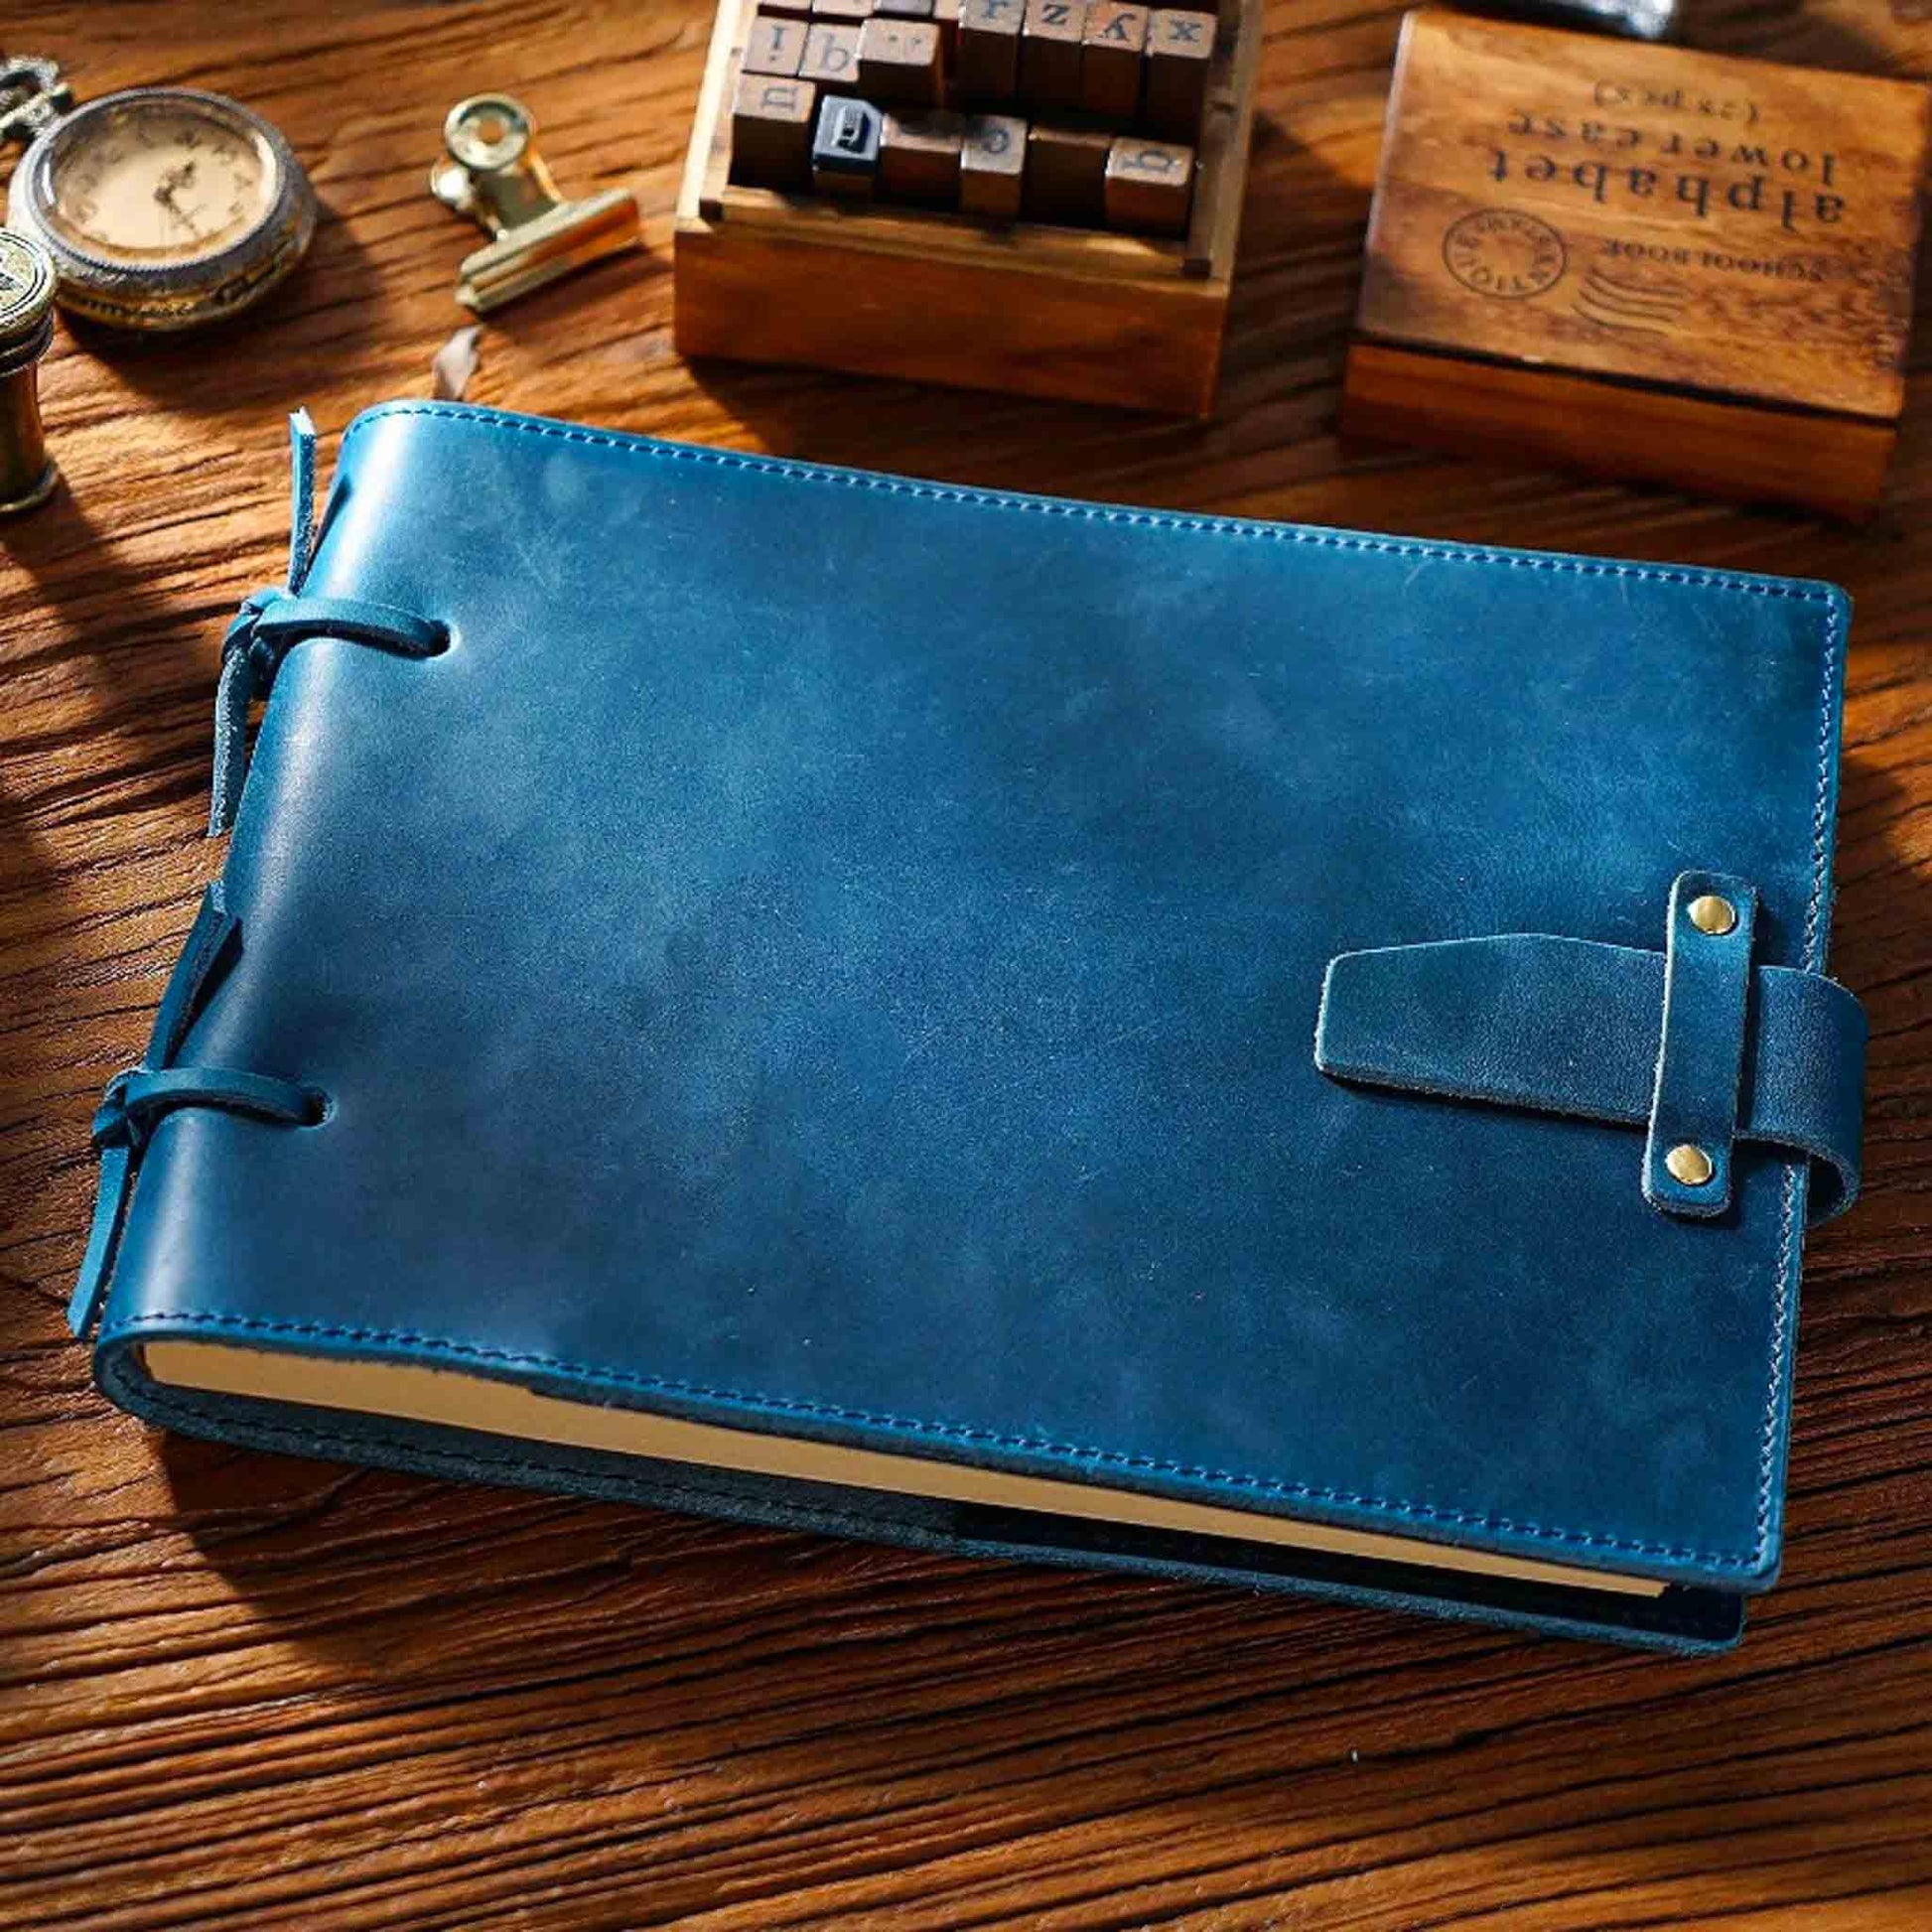 Classical Leather Sketchbook With 6 Colors - Blue Available at 2Fast2See.co